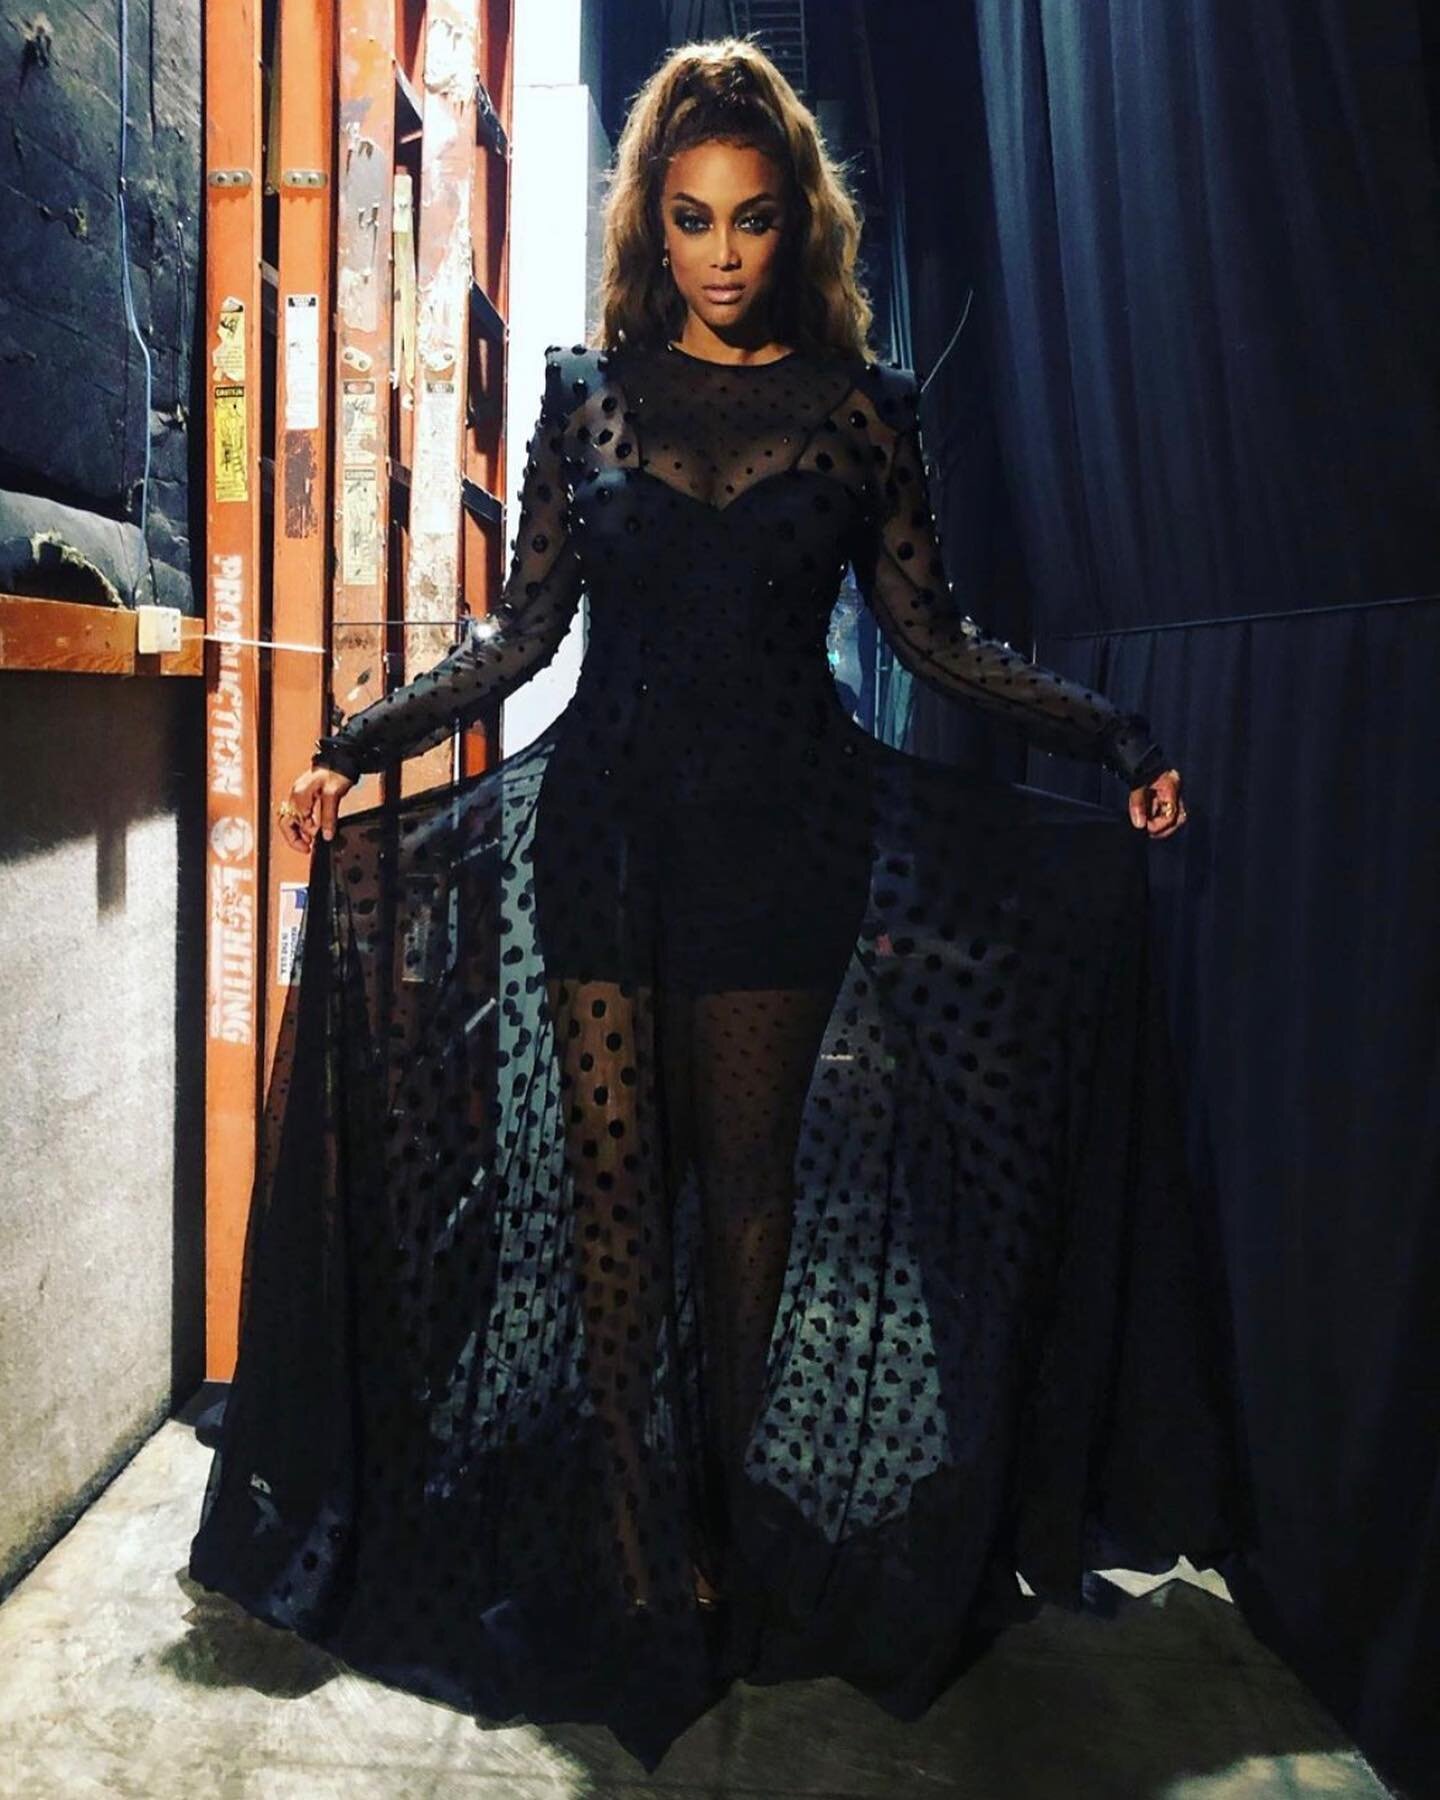 The one and only @tyrabanks wearing our &ldquo;Twilight&rdquo; dress from our SS18 &ldquo;Redemption&rdquo; Collection for #dwts 

Available at www.melissa-mercedes.com

#dancingwiththestars #tyrabanks #tyra #melissamercedes